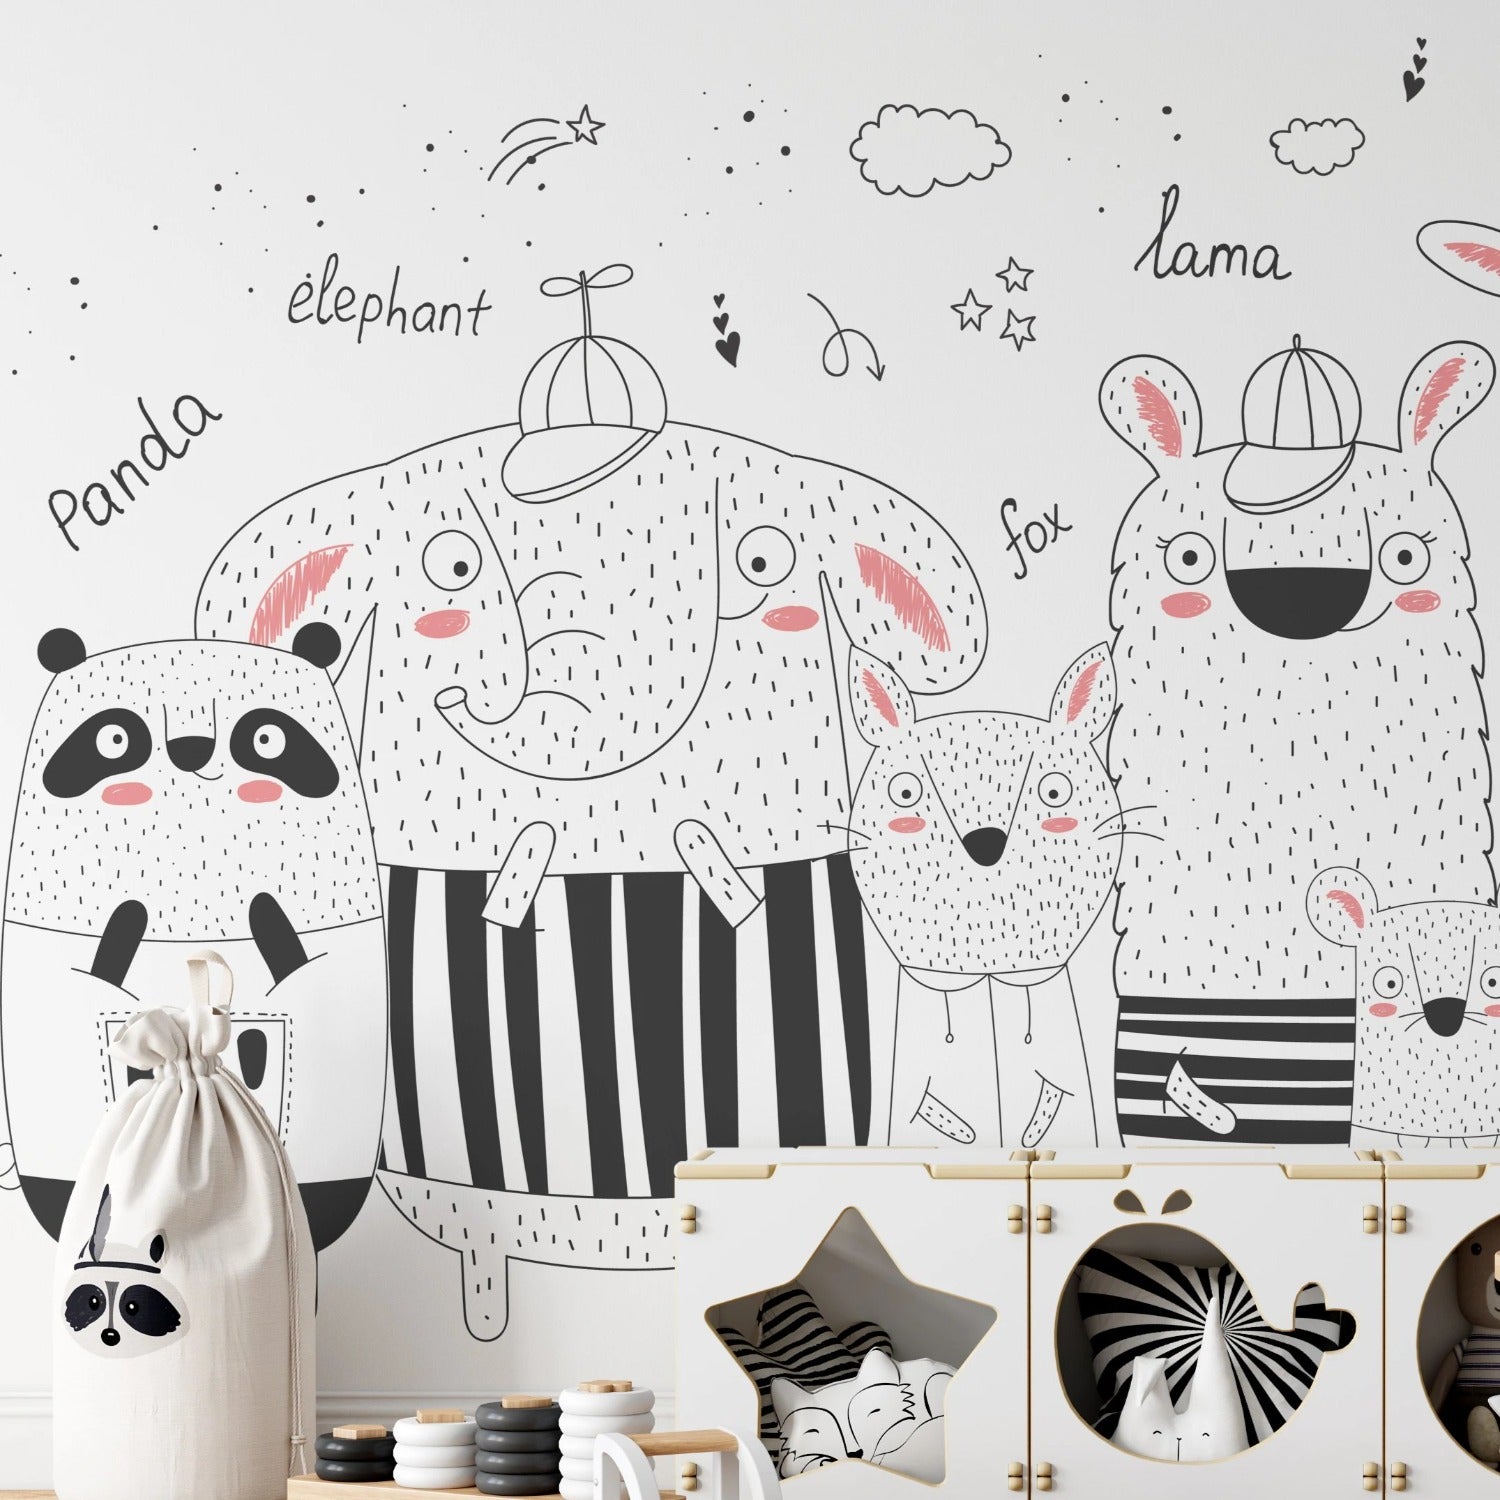 Detailed view of kids animal wallpaper in room setting with elephant, panda, lama, and fox characters